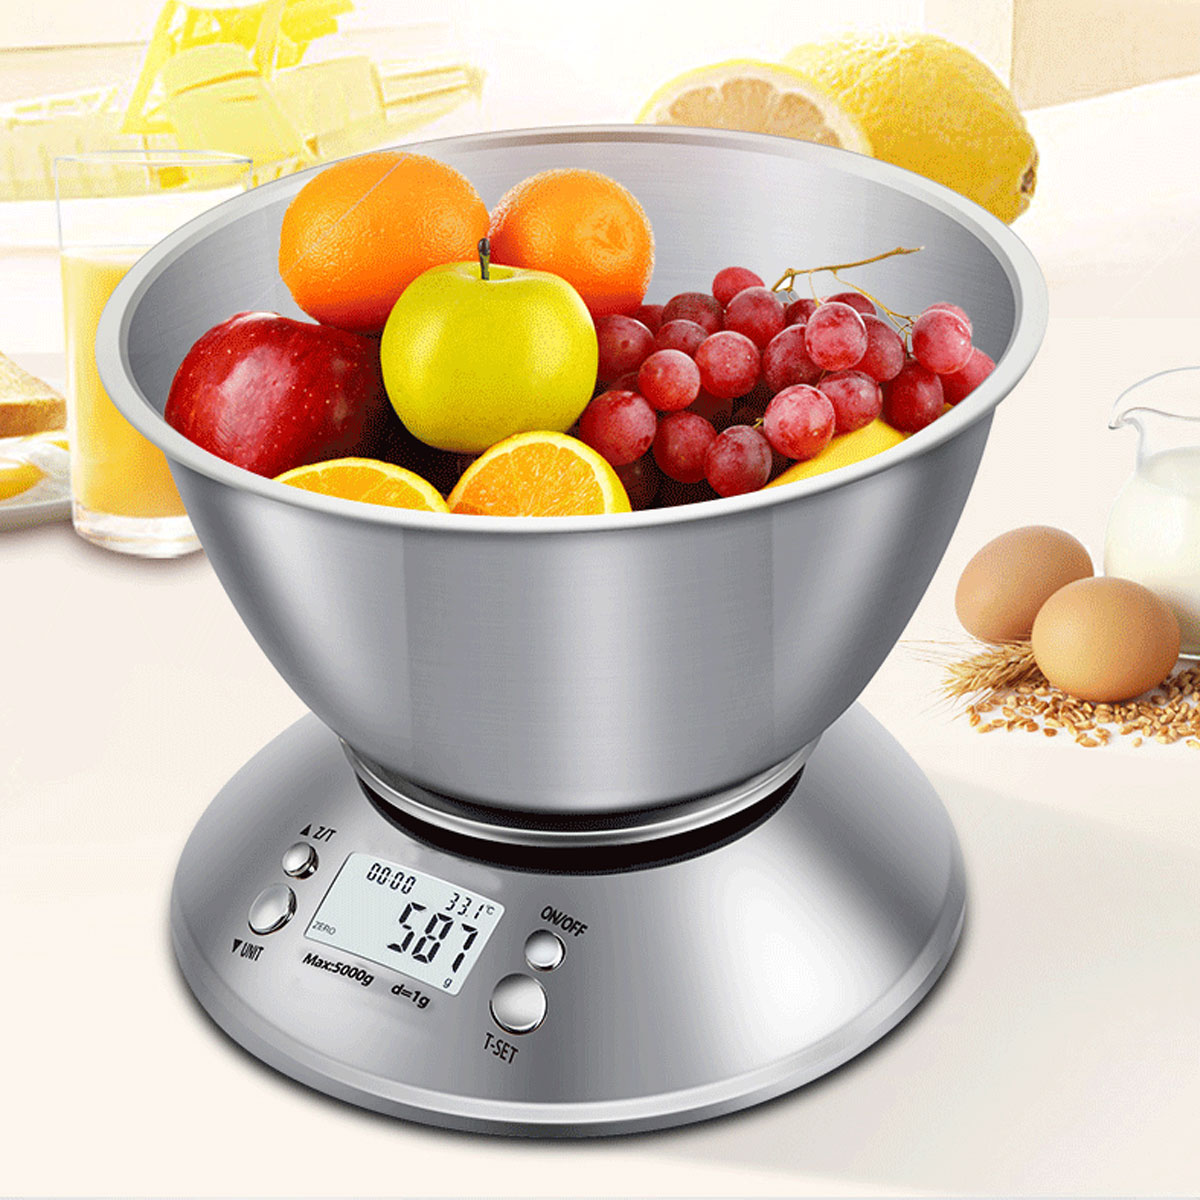 Digital-Kitchen-Scale-LCD-Display-Stainless-Steel-Baking-High-Precision-Removable-Kitchen-Scale-1859940-10